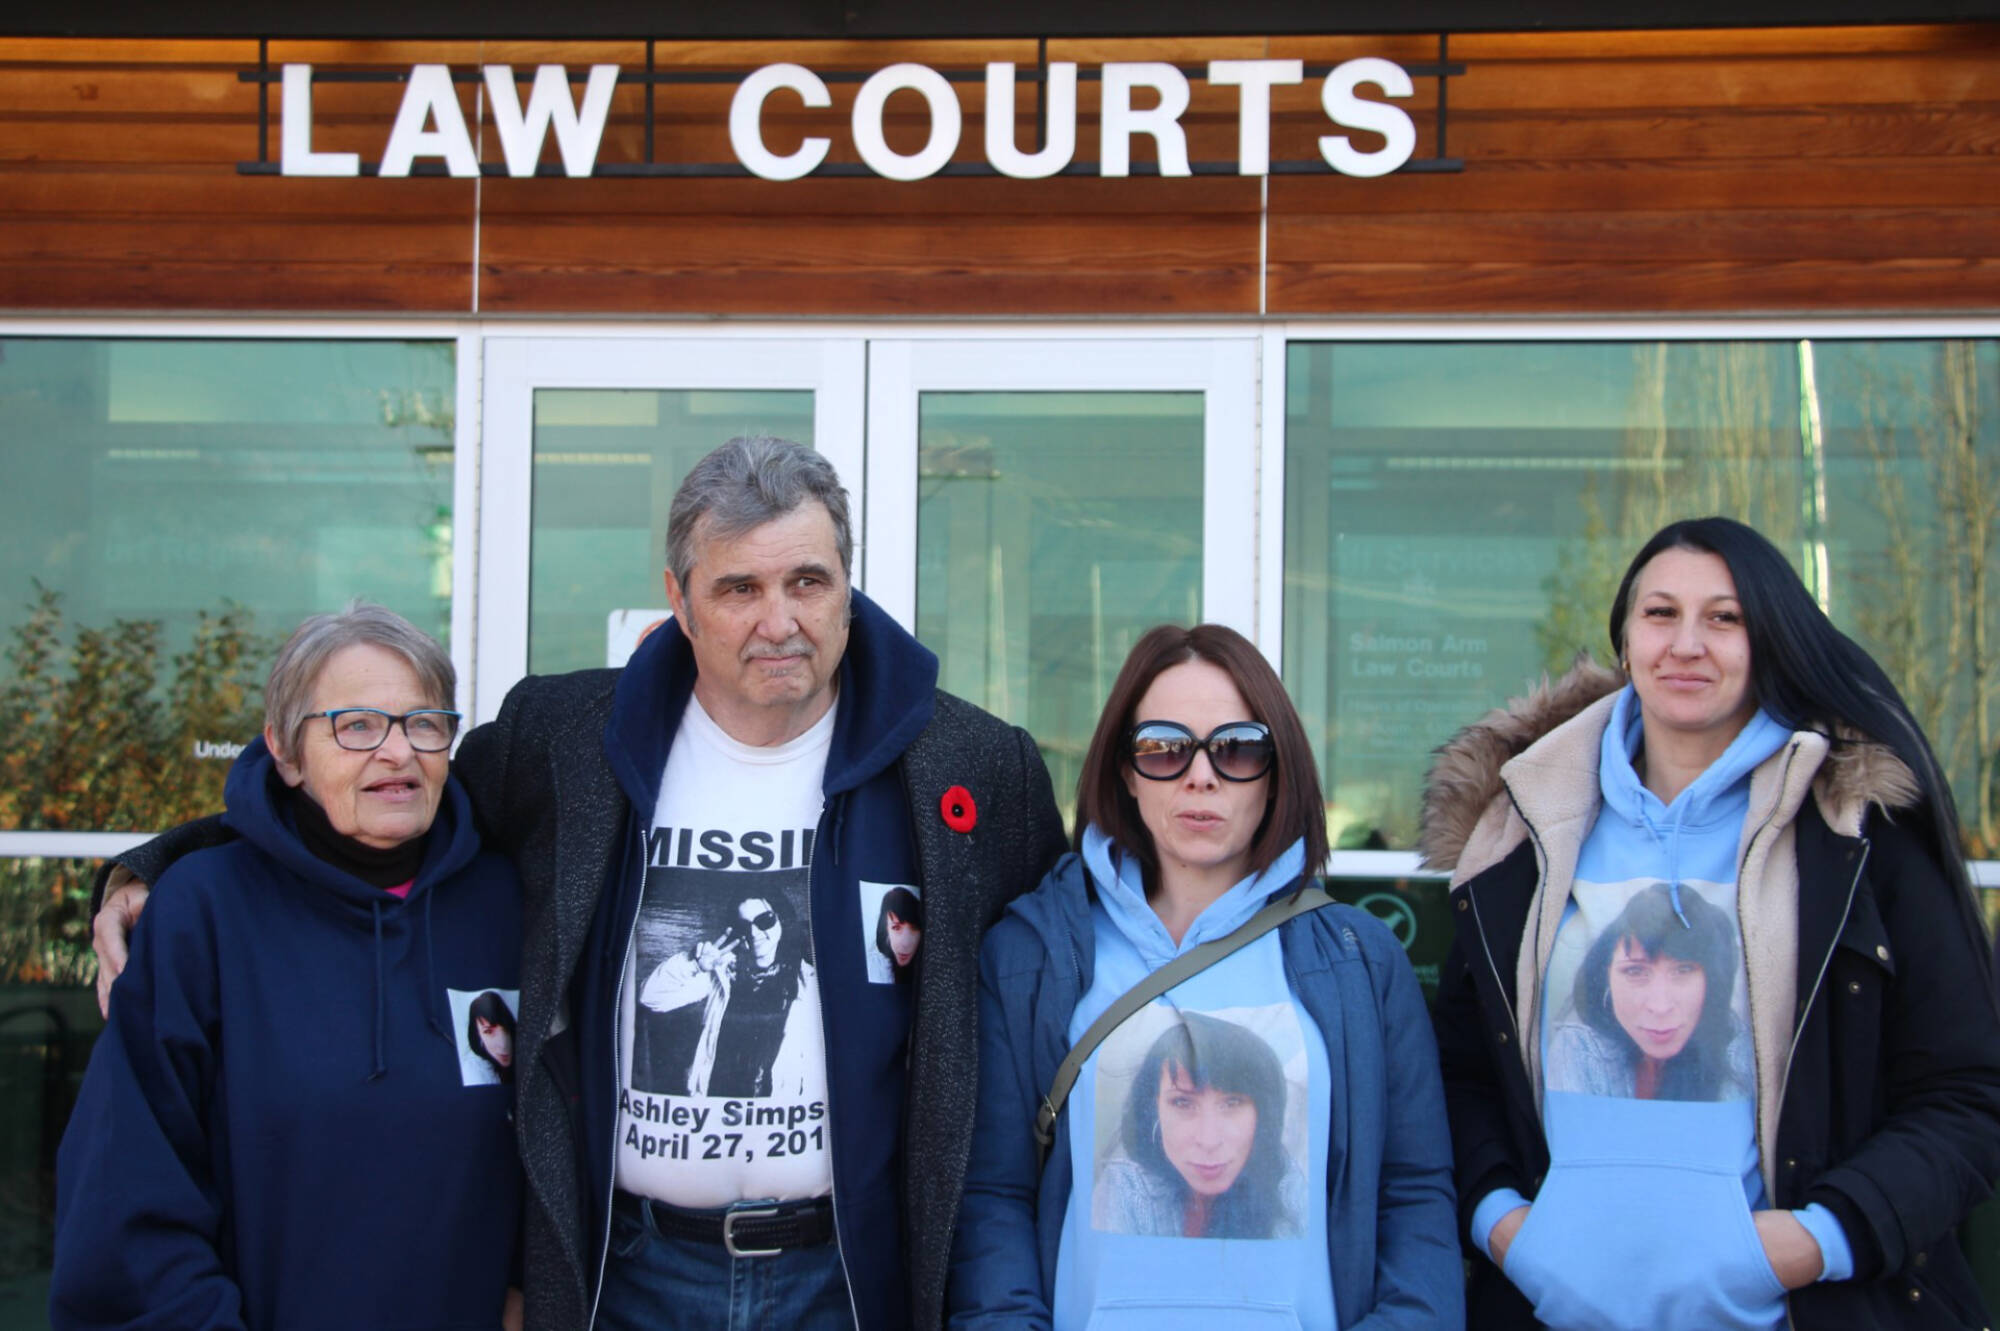 From left to right, Ashley Simpson’s mother Cindy, father John, sister Amanda Langlois, cousin Bobbie-Lynn McGean gather outside the Salmon Arm Law Courts on Oct. 30 after Derek Favell pleads guilty to killing Ashley Simpson. (Martha Wickett photo)